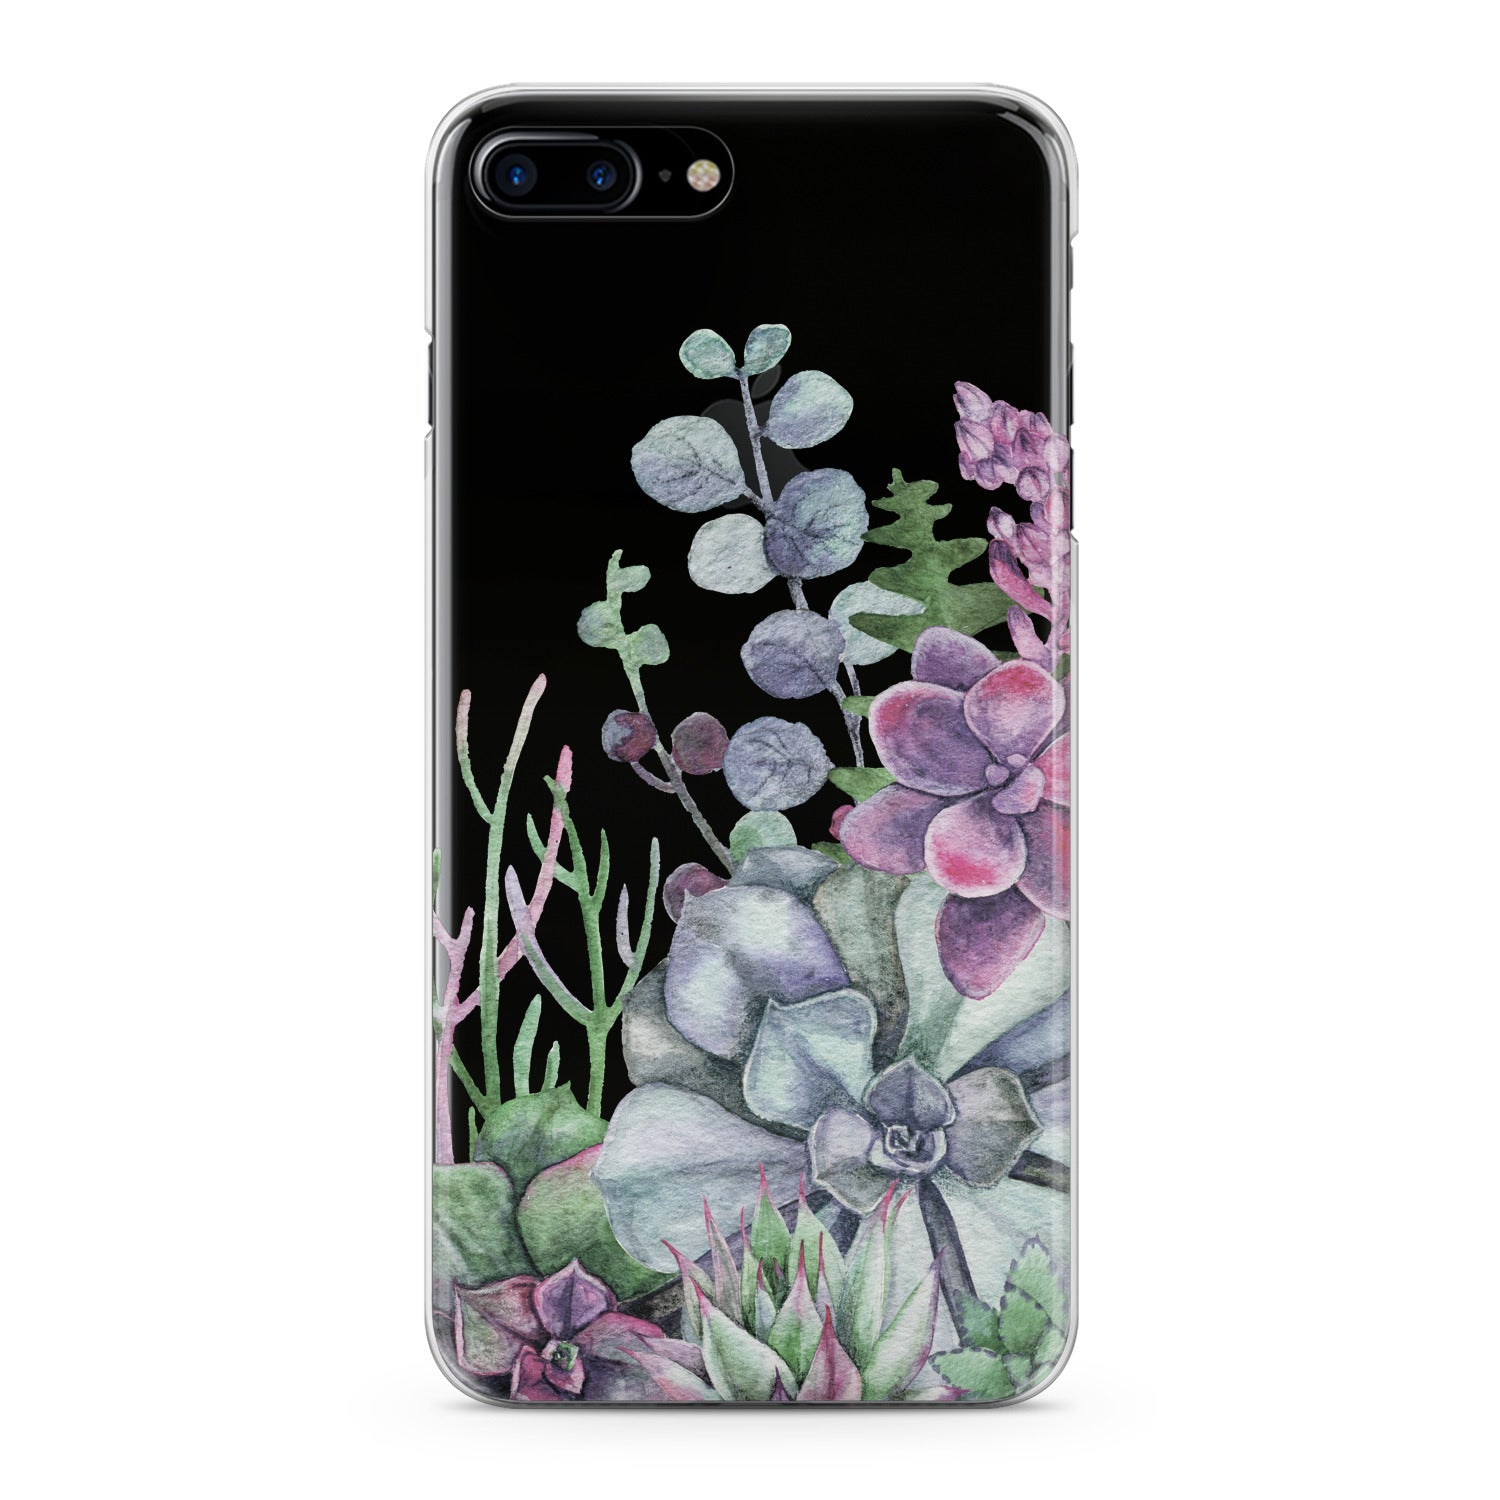 Lex Altern Flowers Succulent Phone Case for your iPhone & Android phone.